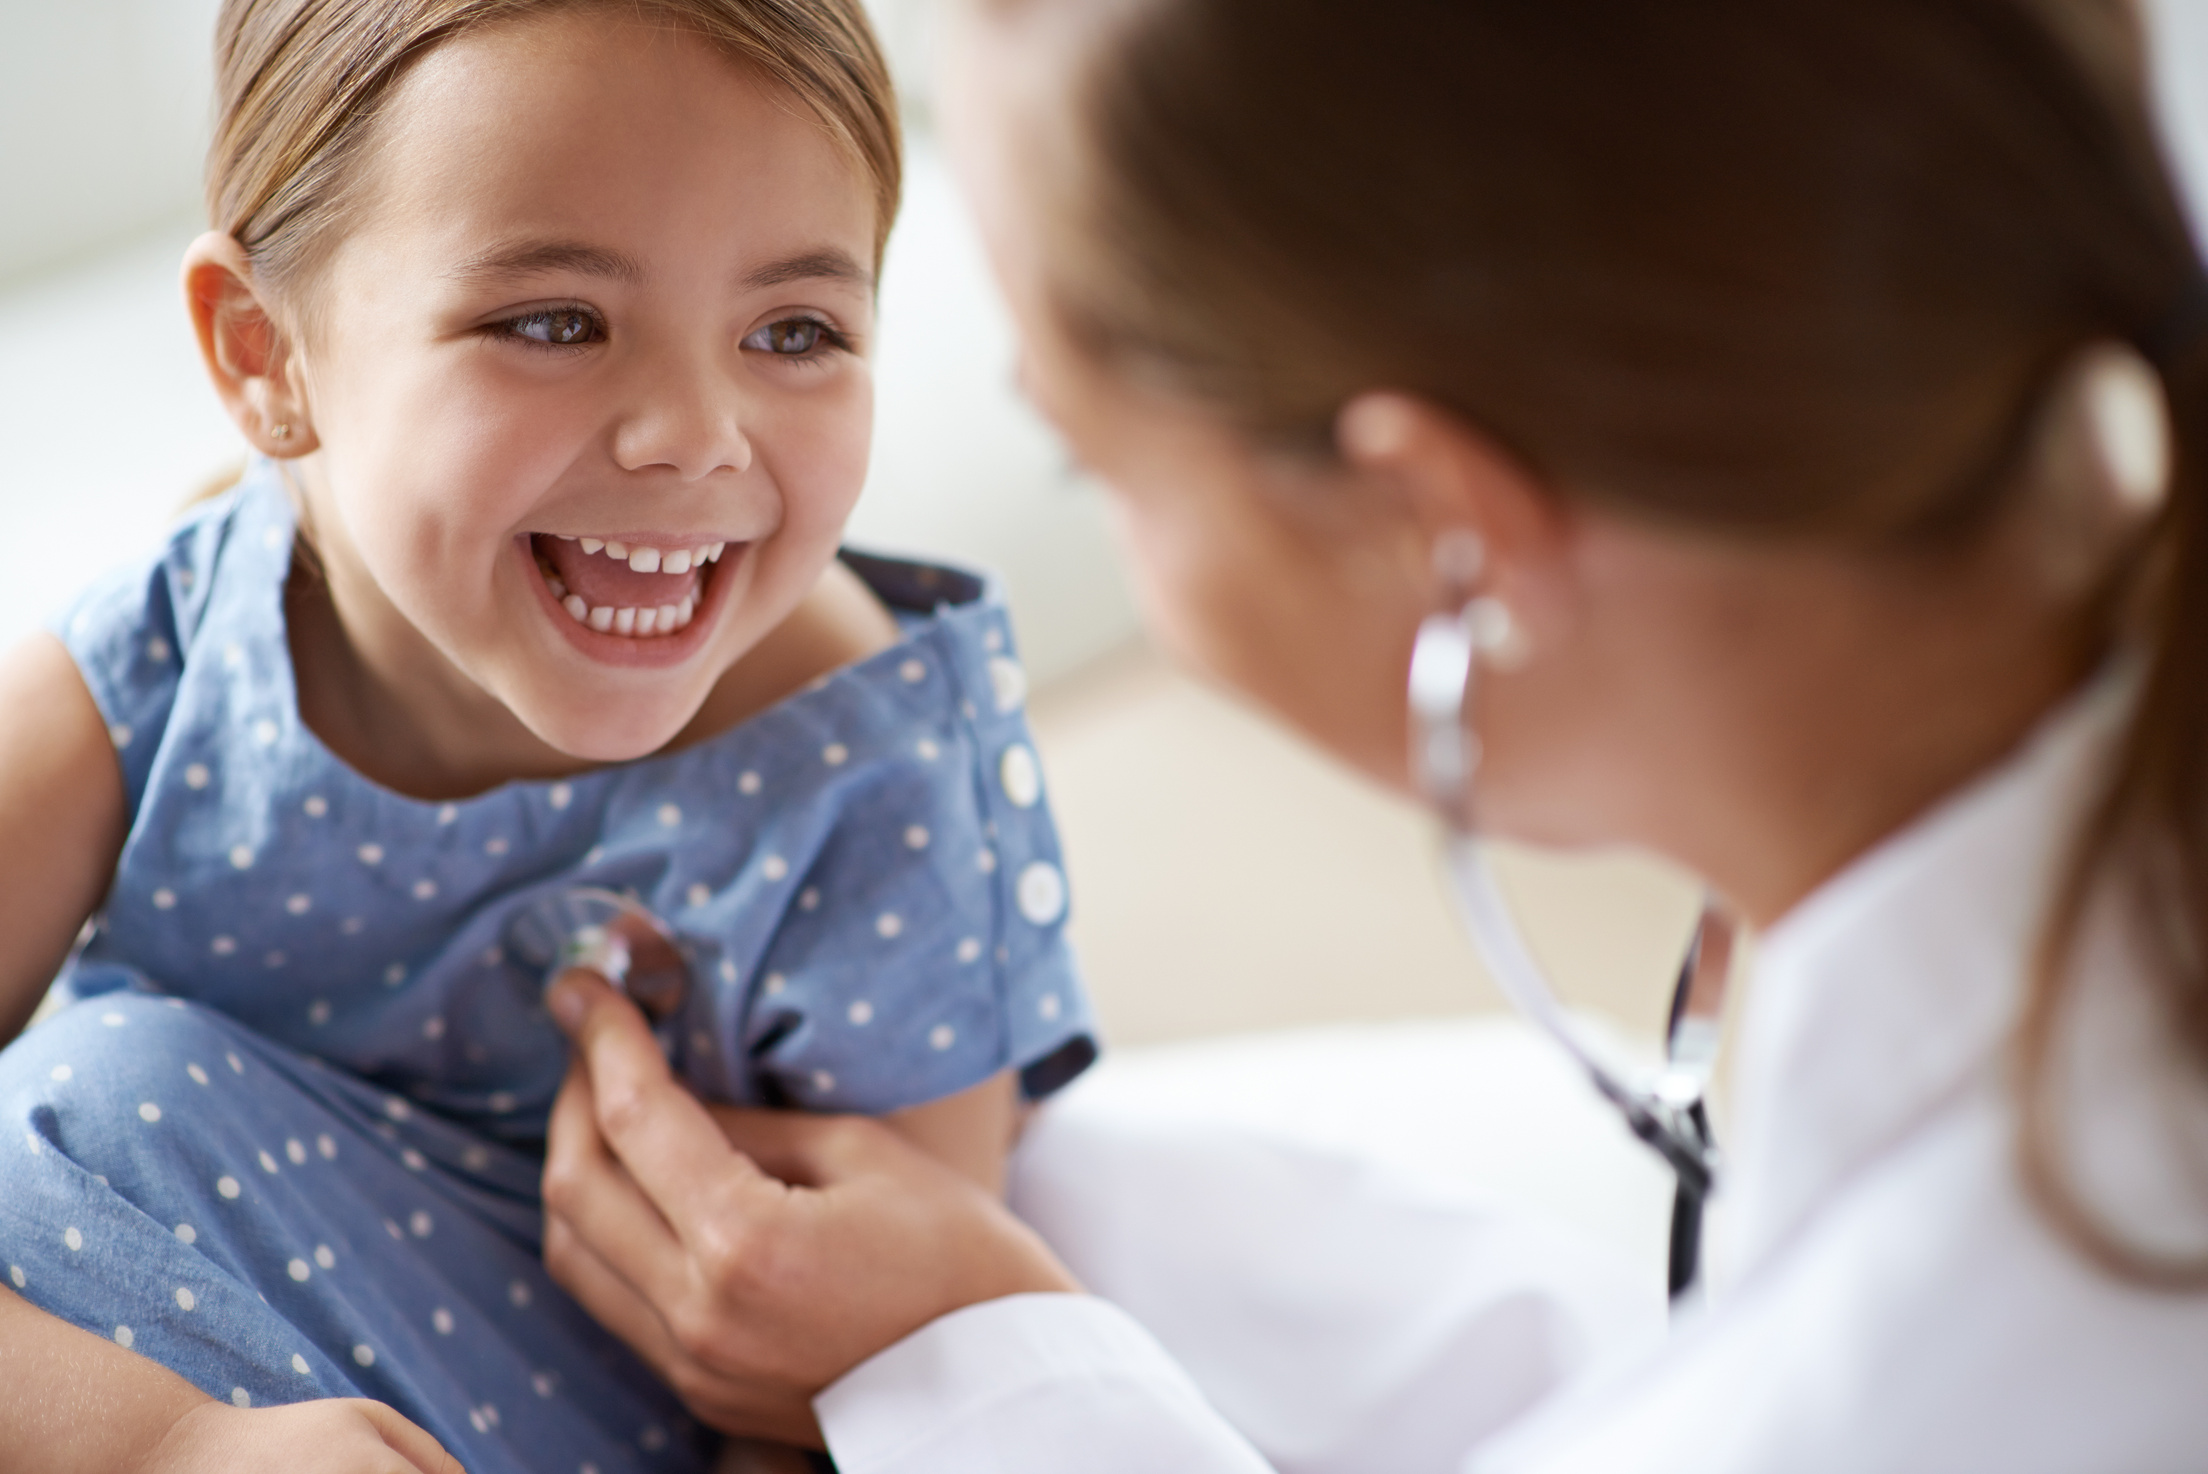 Happy Child, Girl and Stethoscope of Doctor for Medical Consulting, Healthy Lungs and Listening to Heartbeat. Face of Laughing Kid, Pediatrician and Chest Assessment for Healthcare Analysis in Clinic